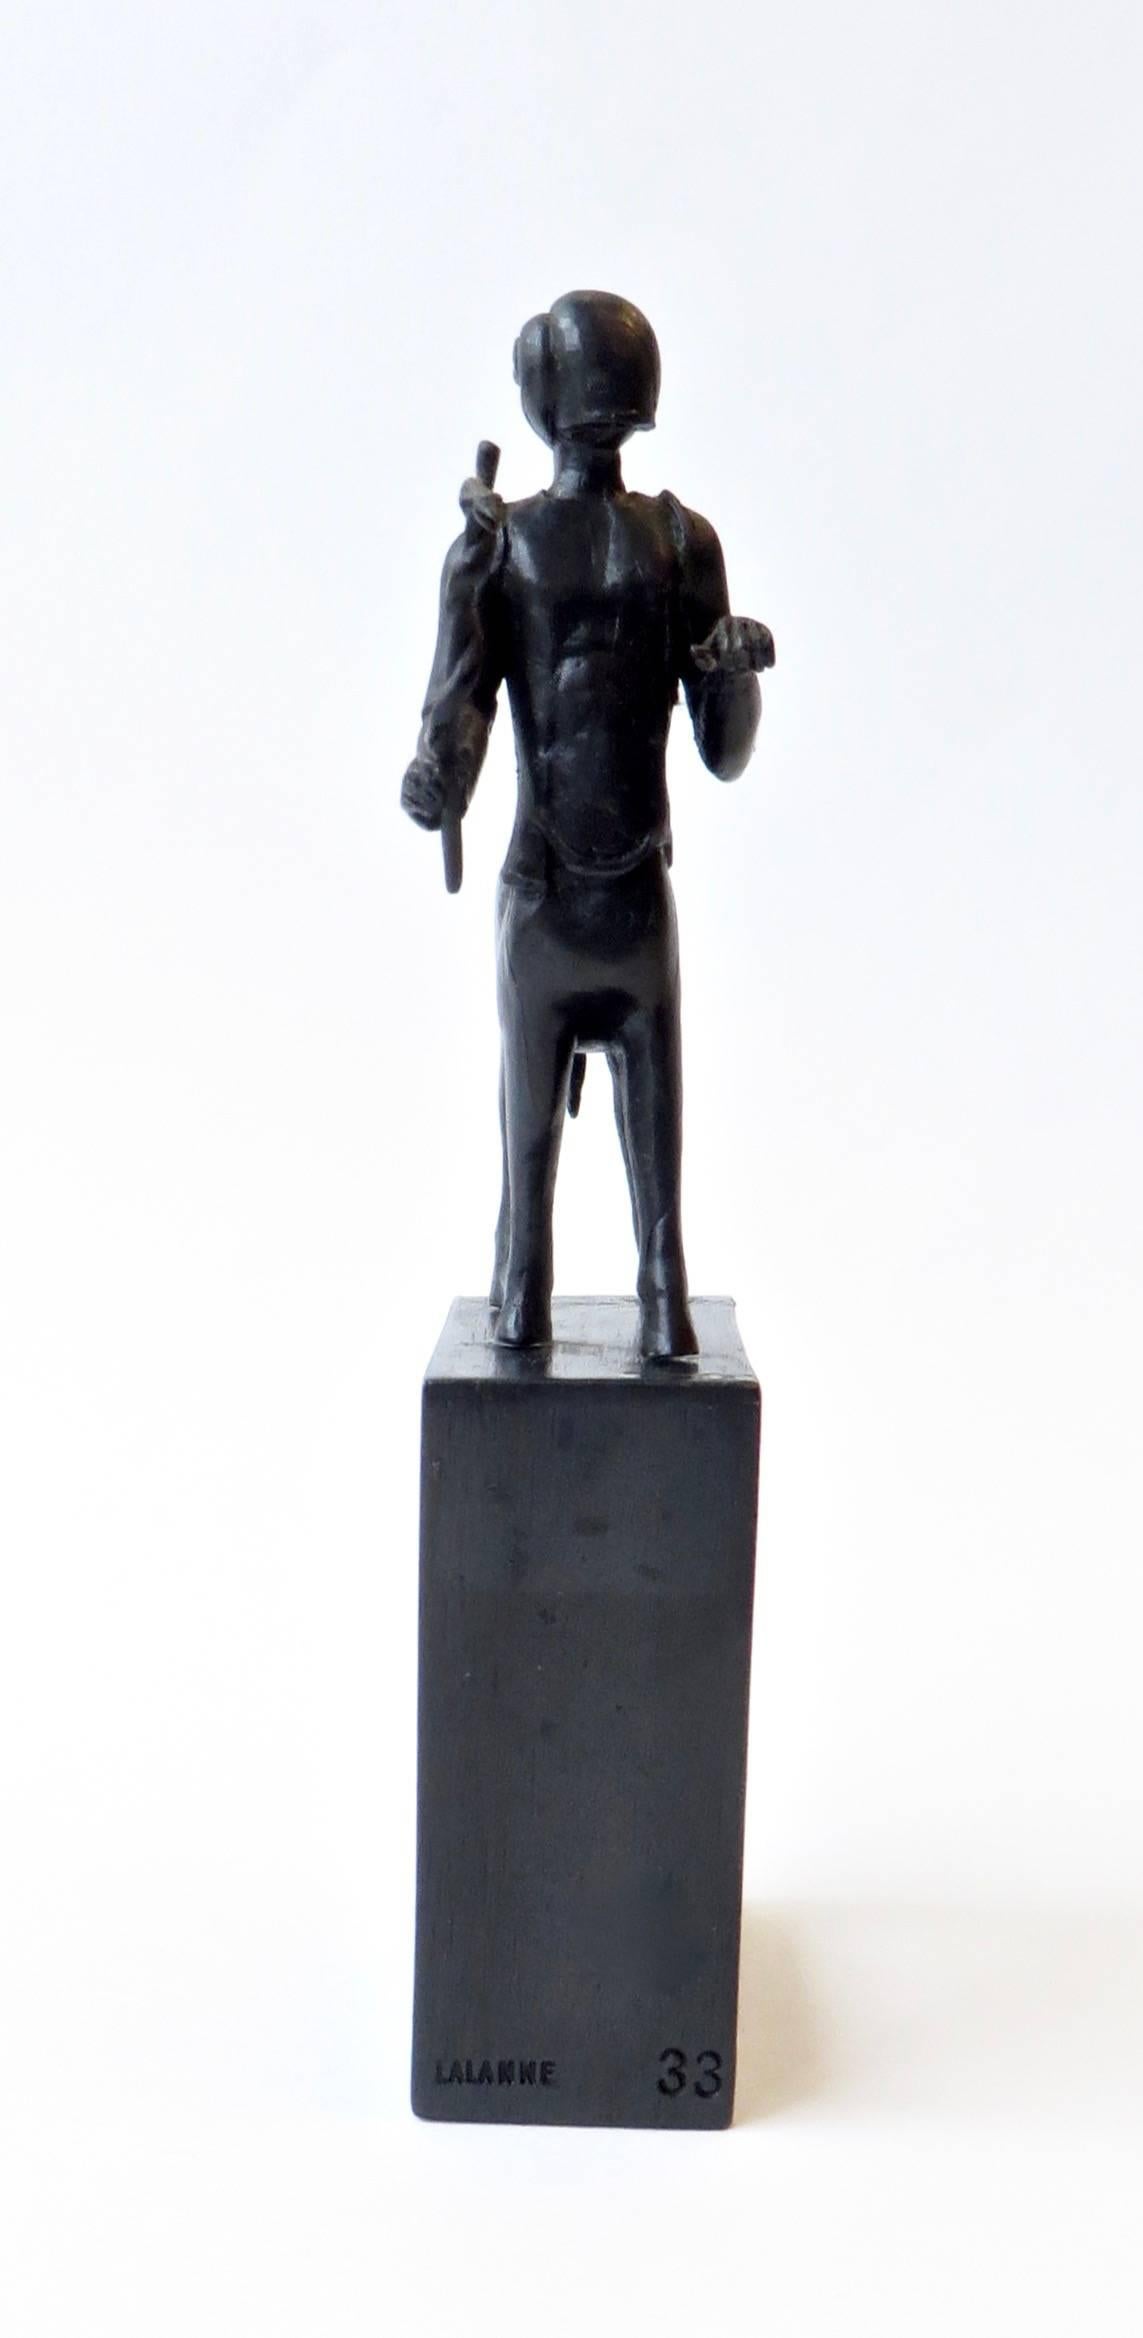 A Francois-Xavier Lalanne petit bronze centaure sculpture with a dark patina, circa 1985. 
This was a small gift of a limited edition made for clients of a French pharmaceutical company, thus the symbol he is carrying. 
The base is 2.5